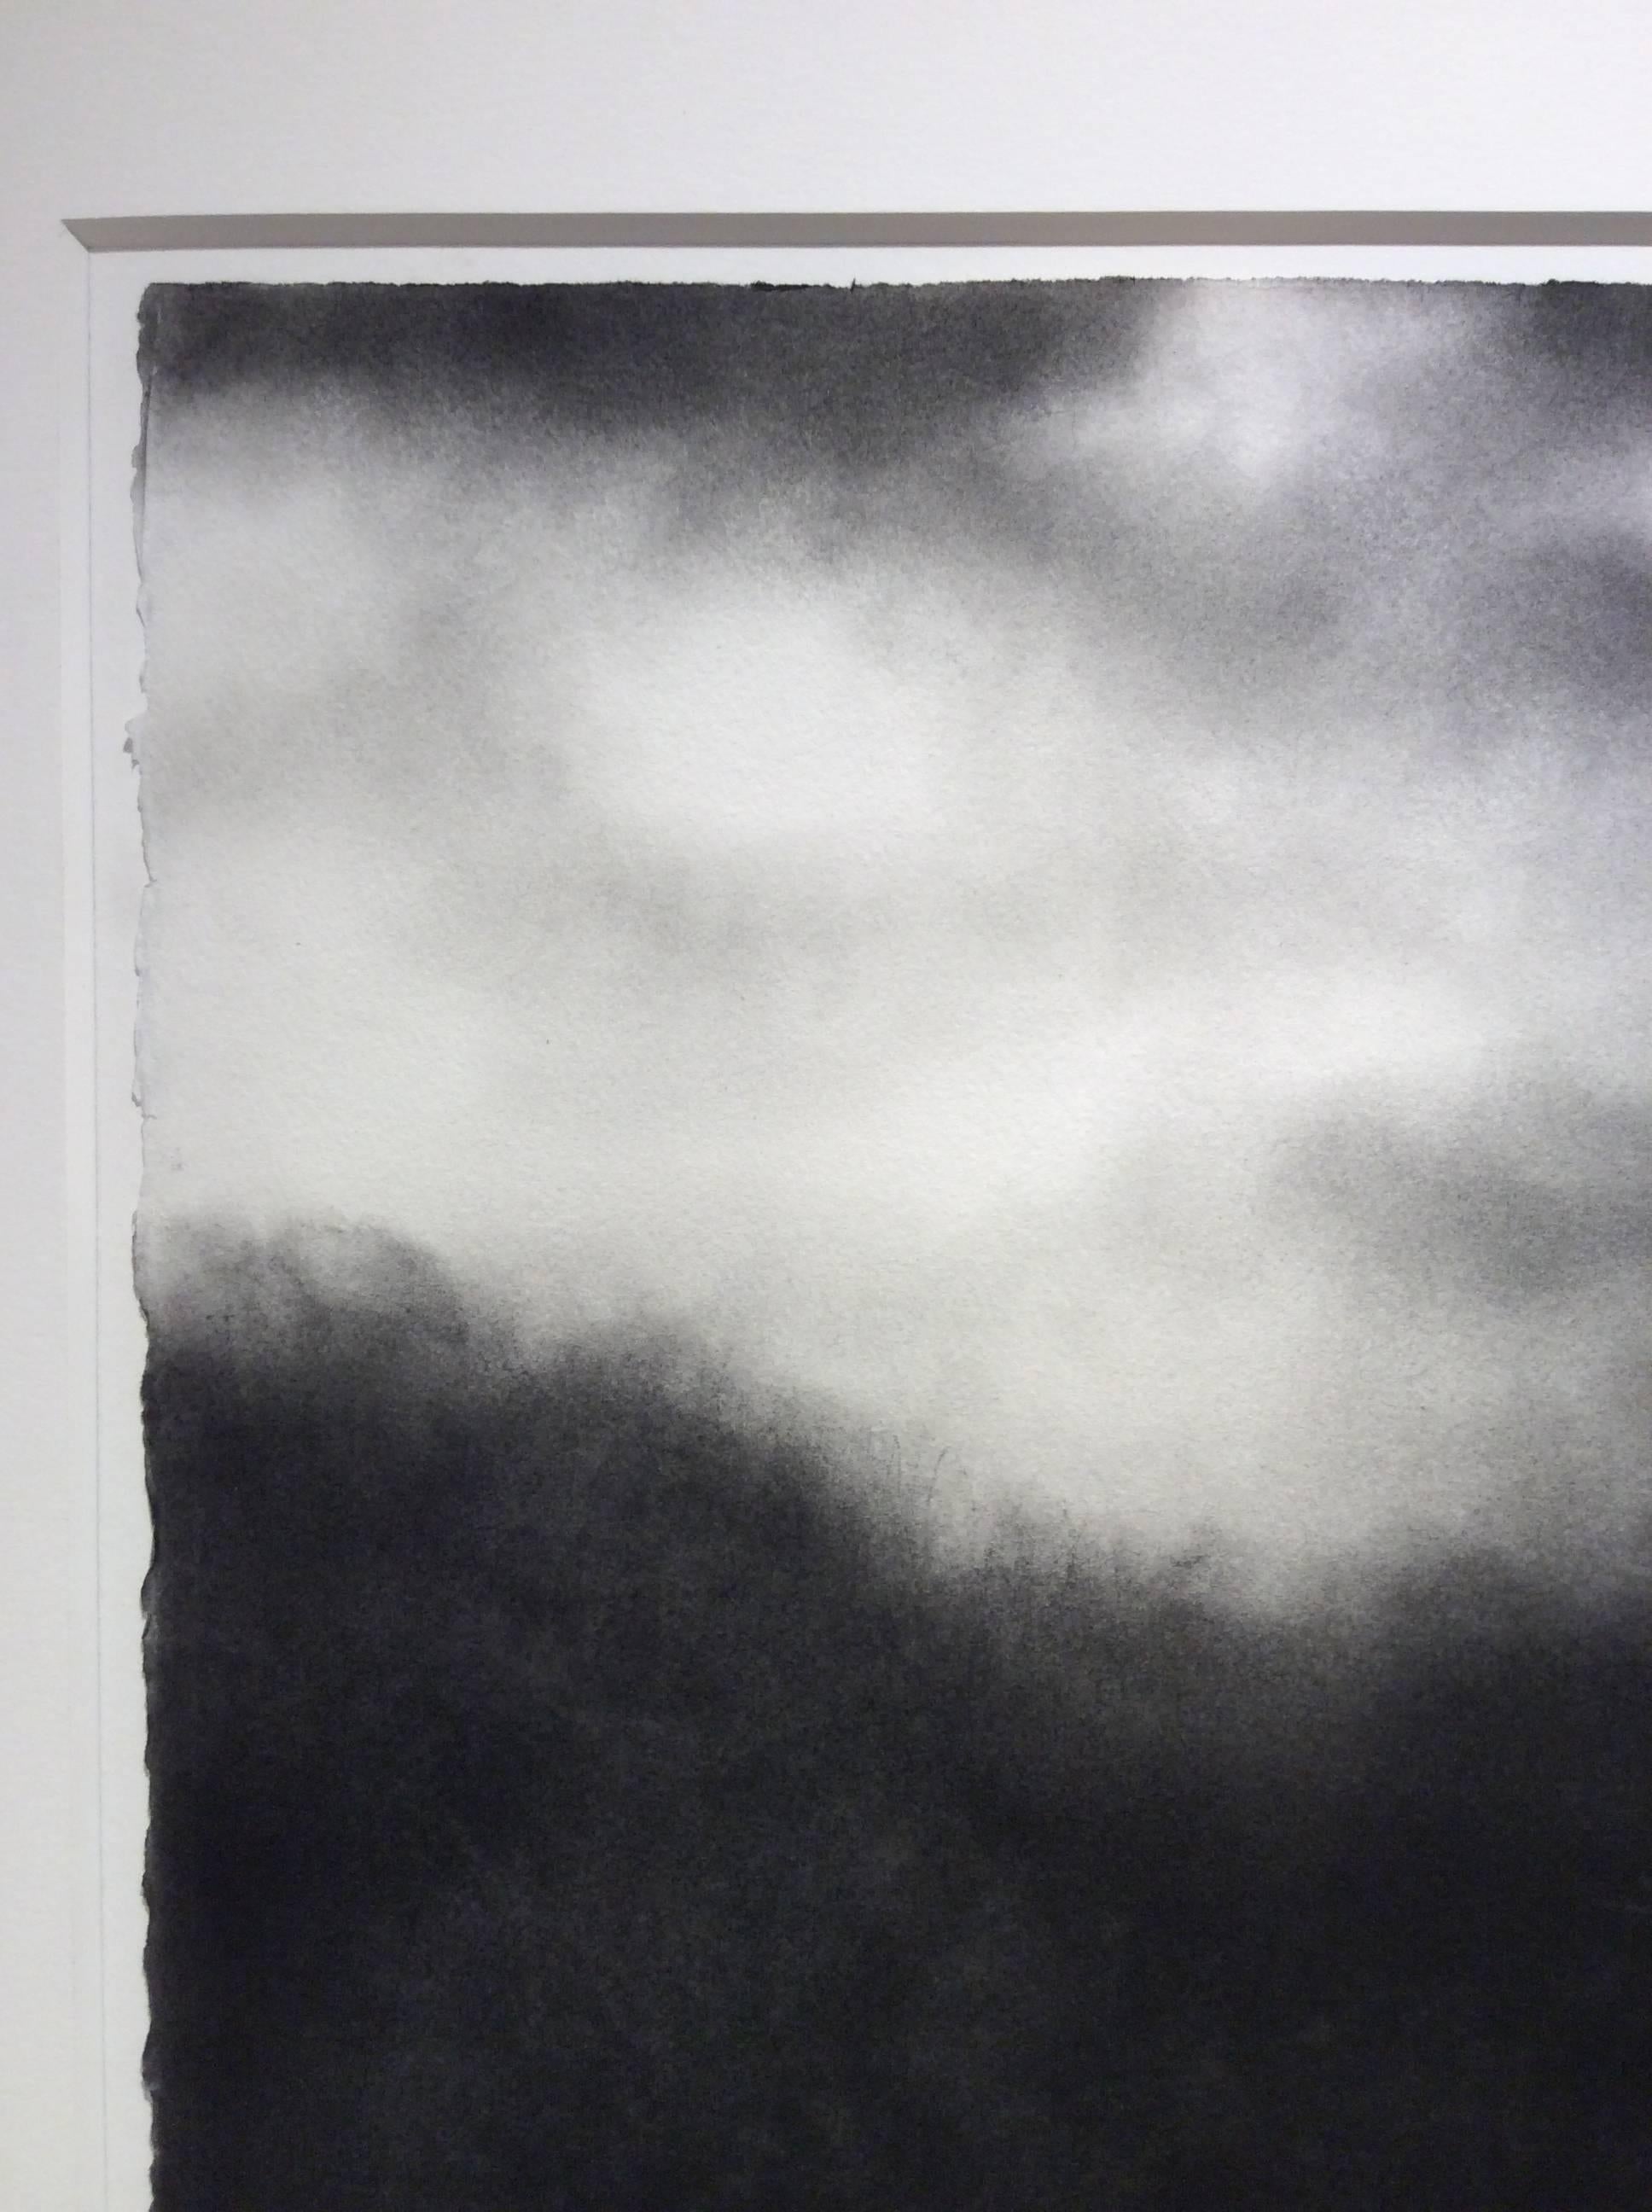 The Long Black Land (Black & White Charcoal Landscape Drawing of Moon & Clouds)
Black and white landscape drawing on paper
charcoal and carbon on Cotton Rag Archival paper
16 x 20 inch paper size, 23 x 27 x 1 inches framed (custom charcoal painted